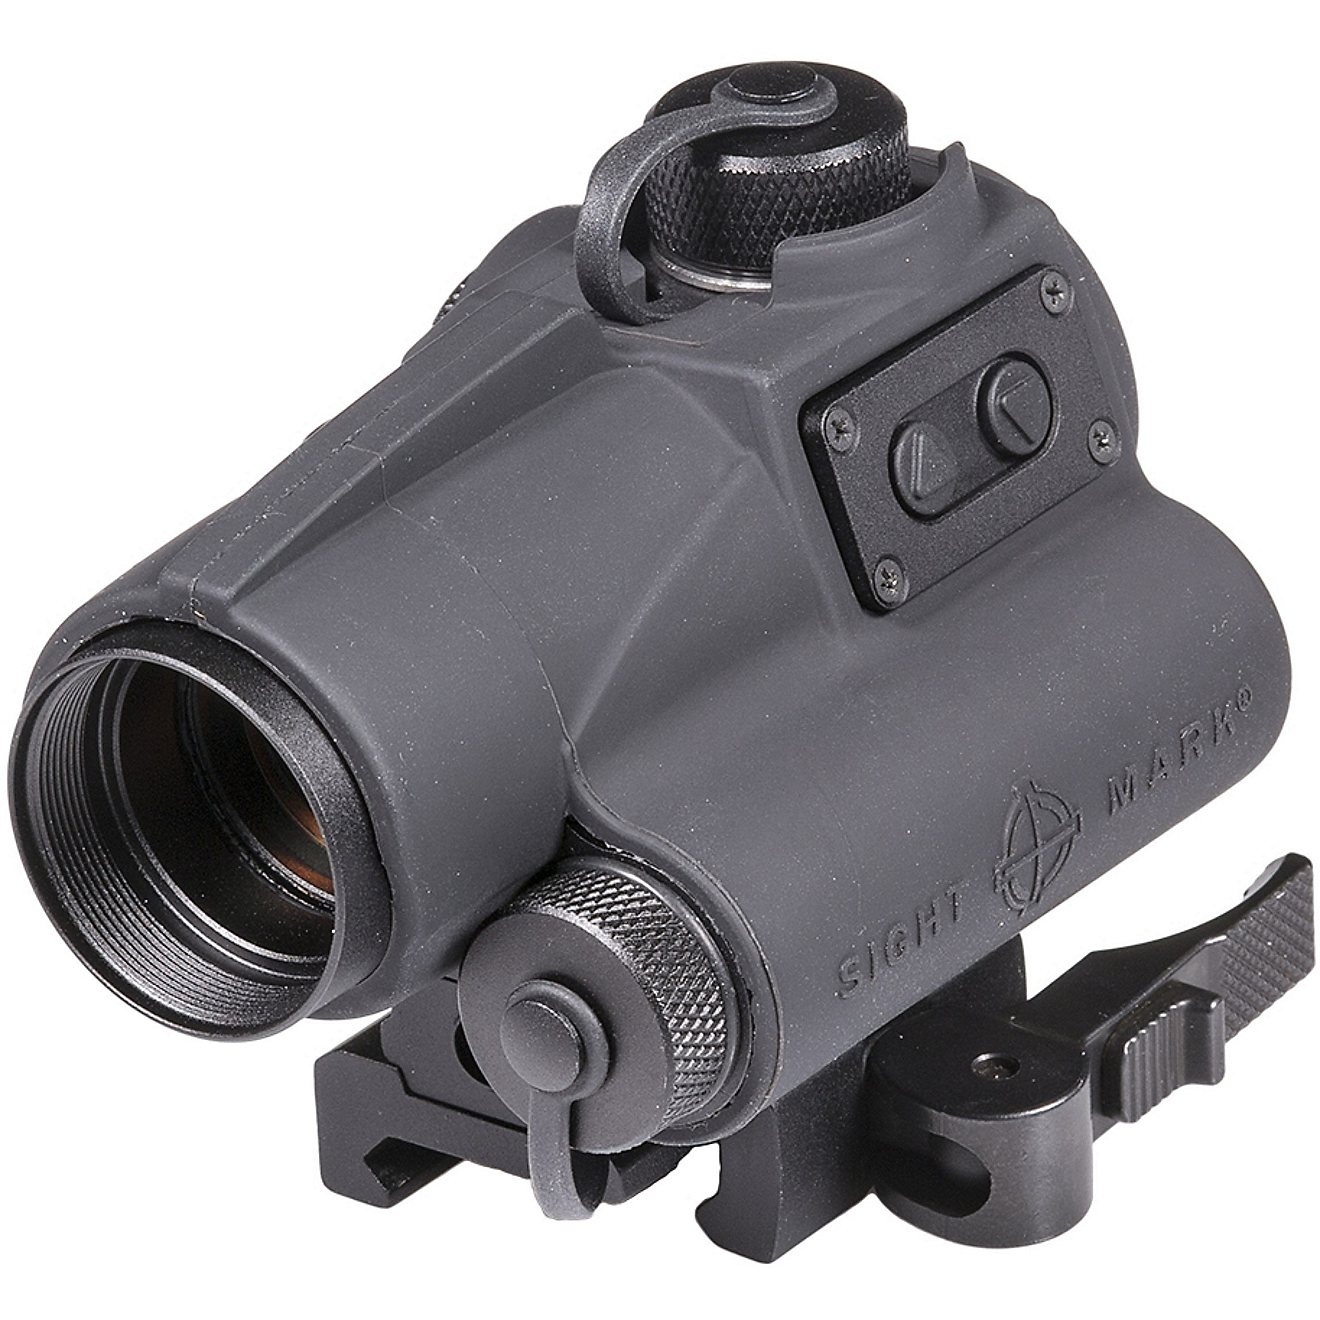 Sightmark Wolverine CSR Red Dot Sight                                                                                            - view number 2